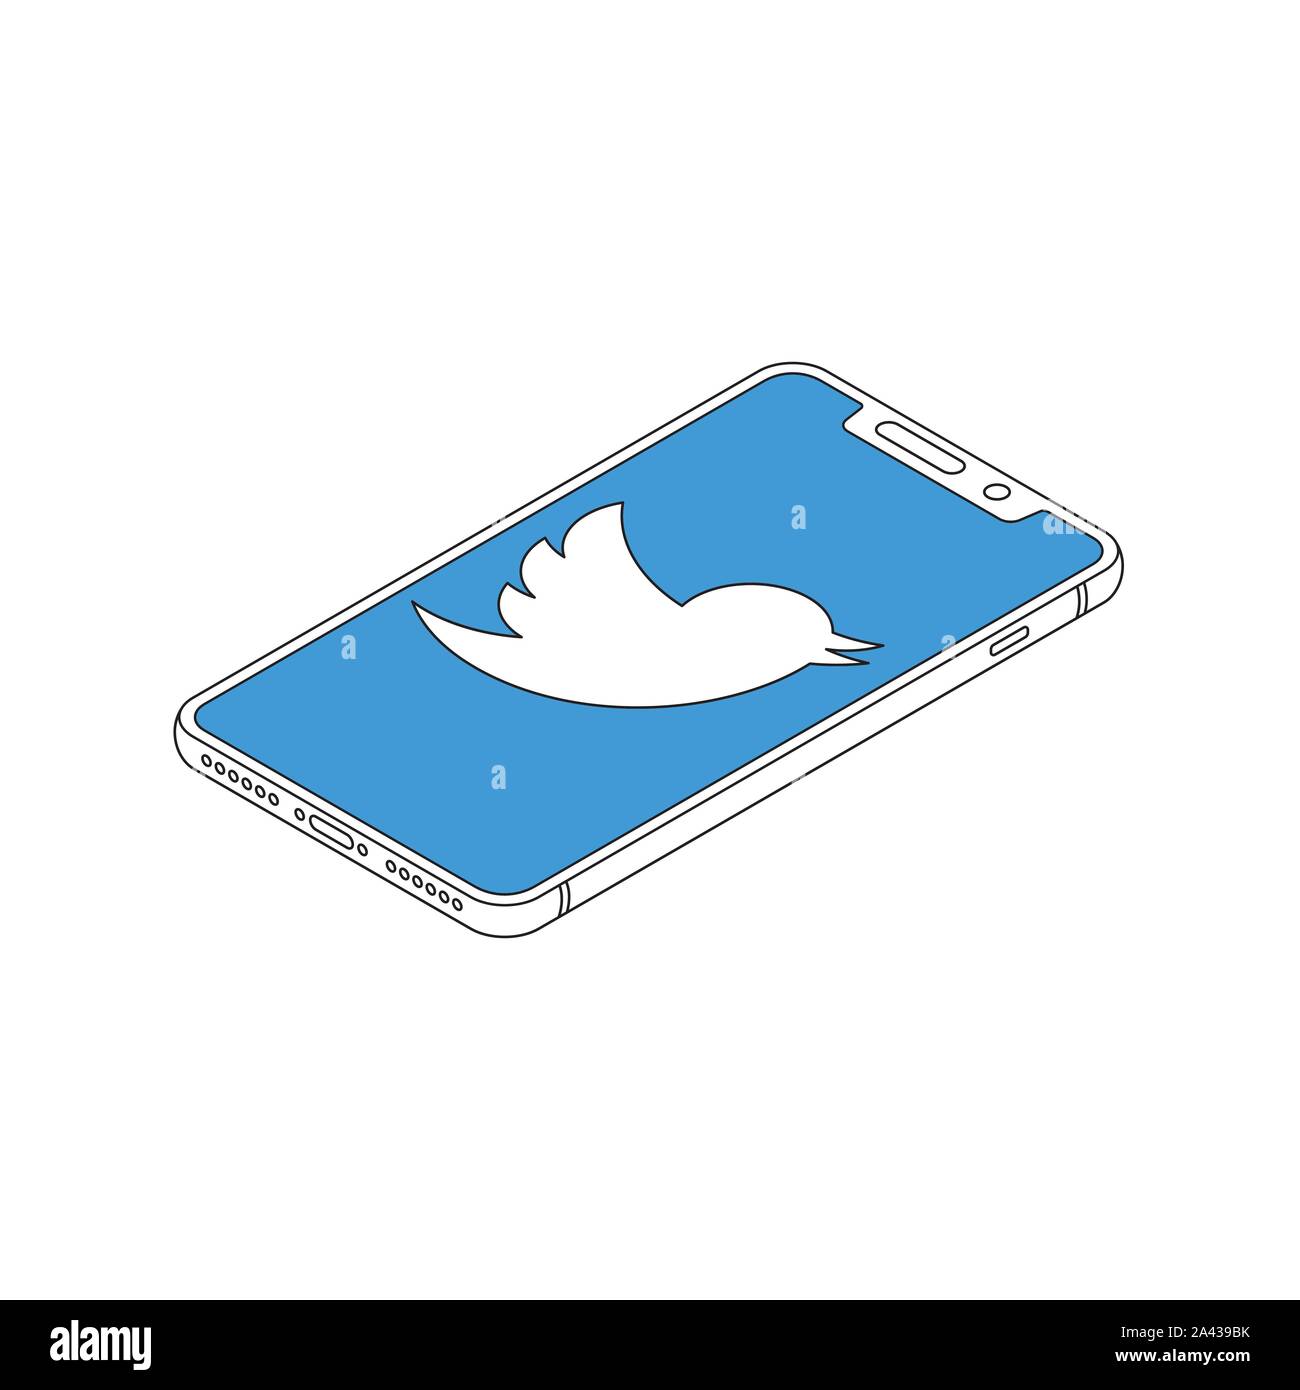 Twitter logo on iphone X display isometric outline vector illustration Stock Vector